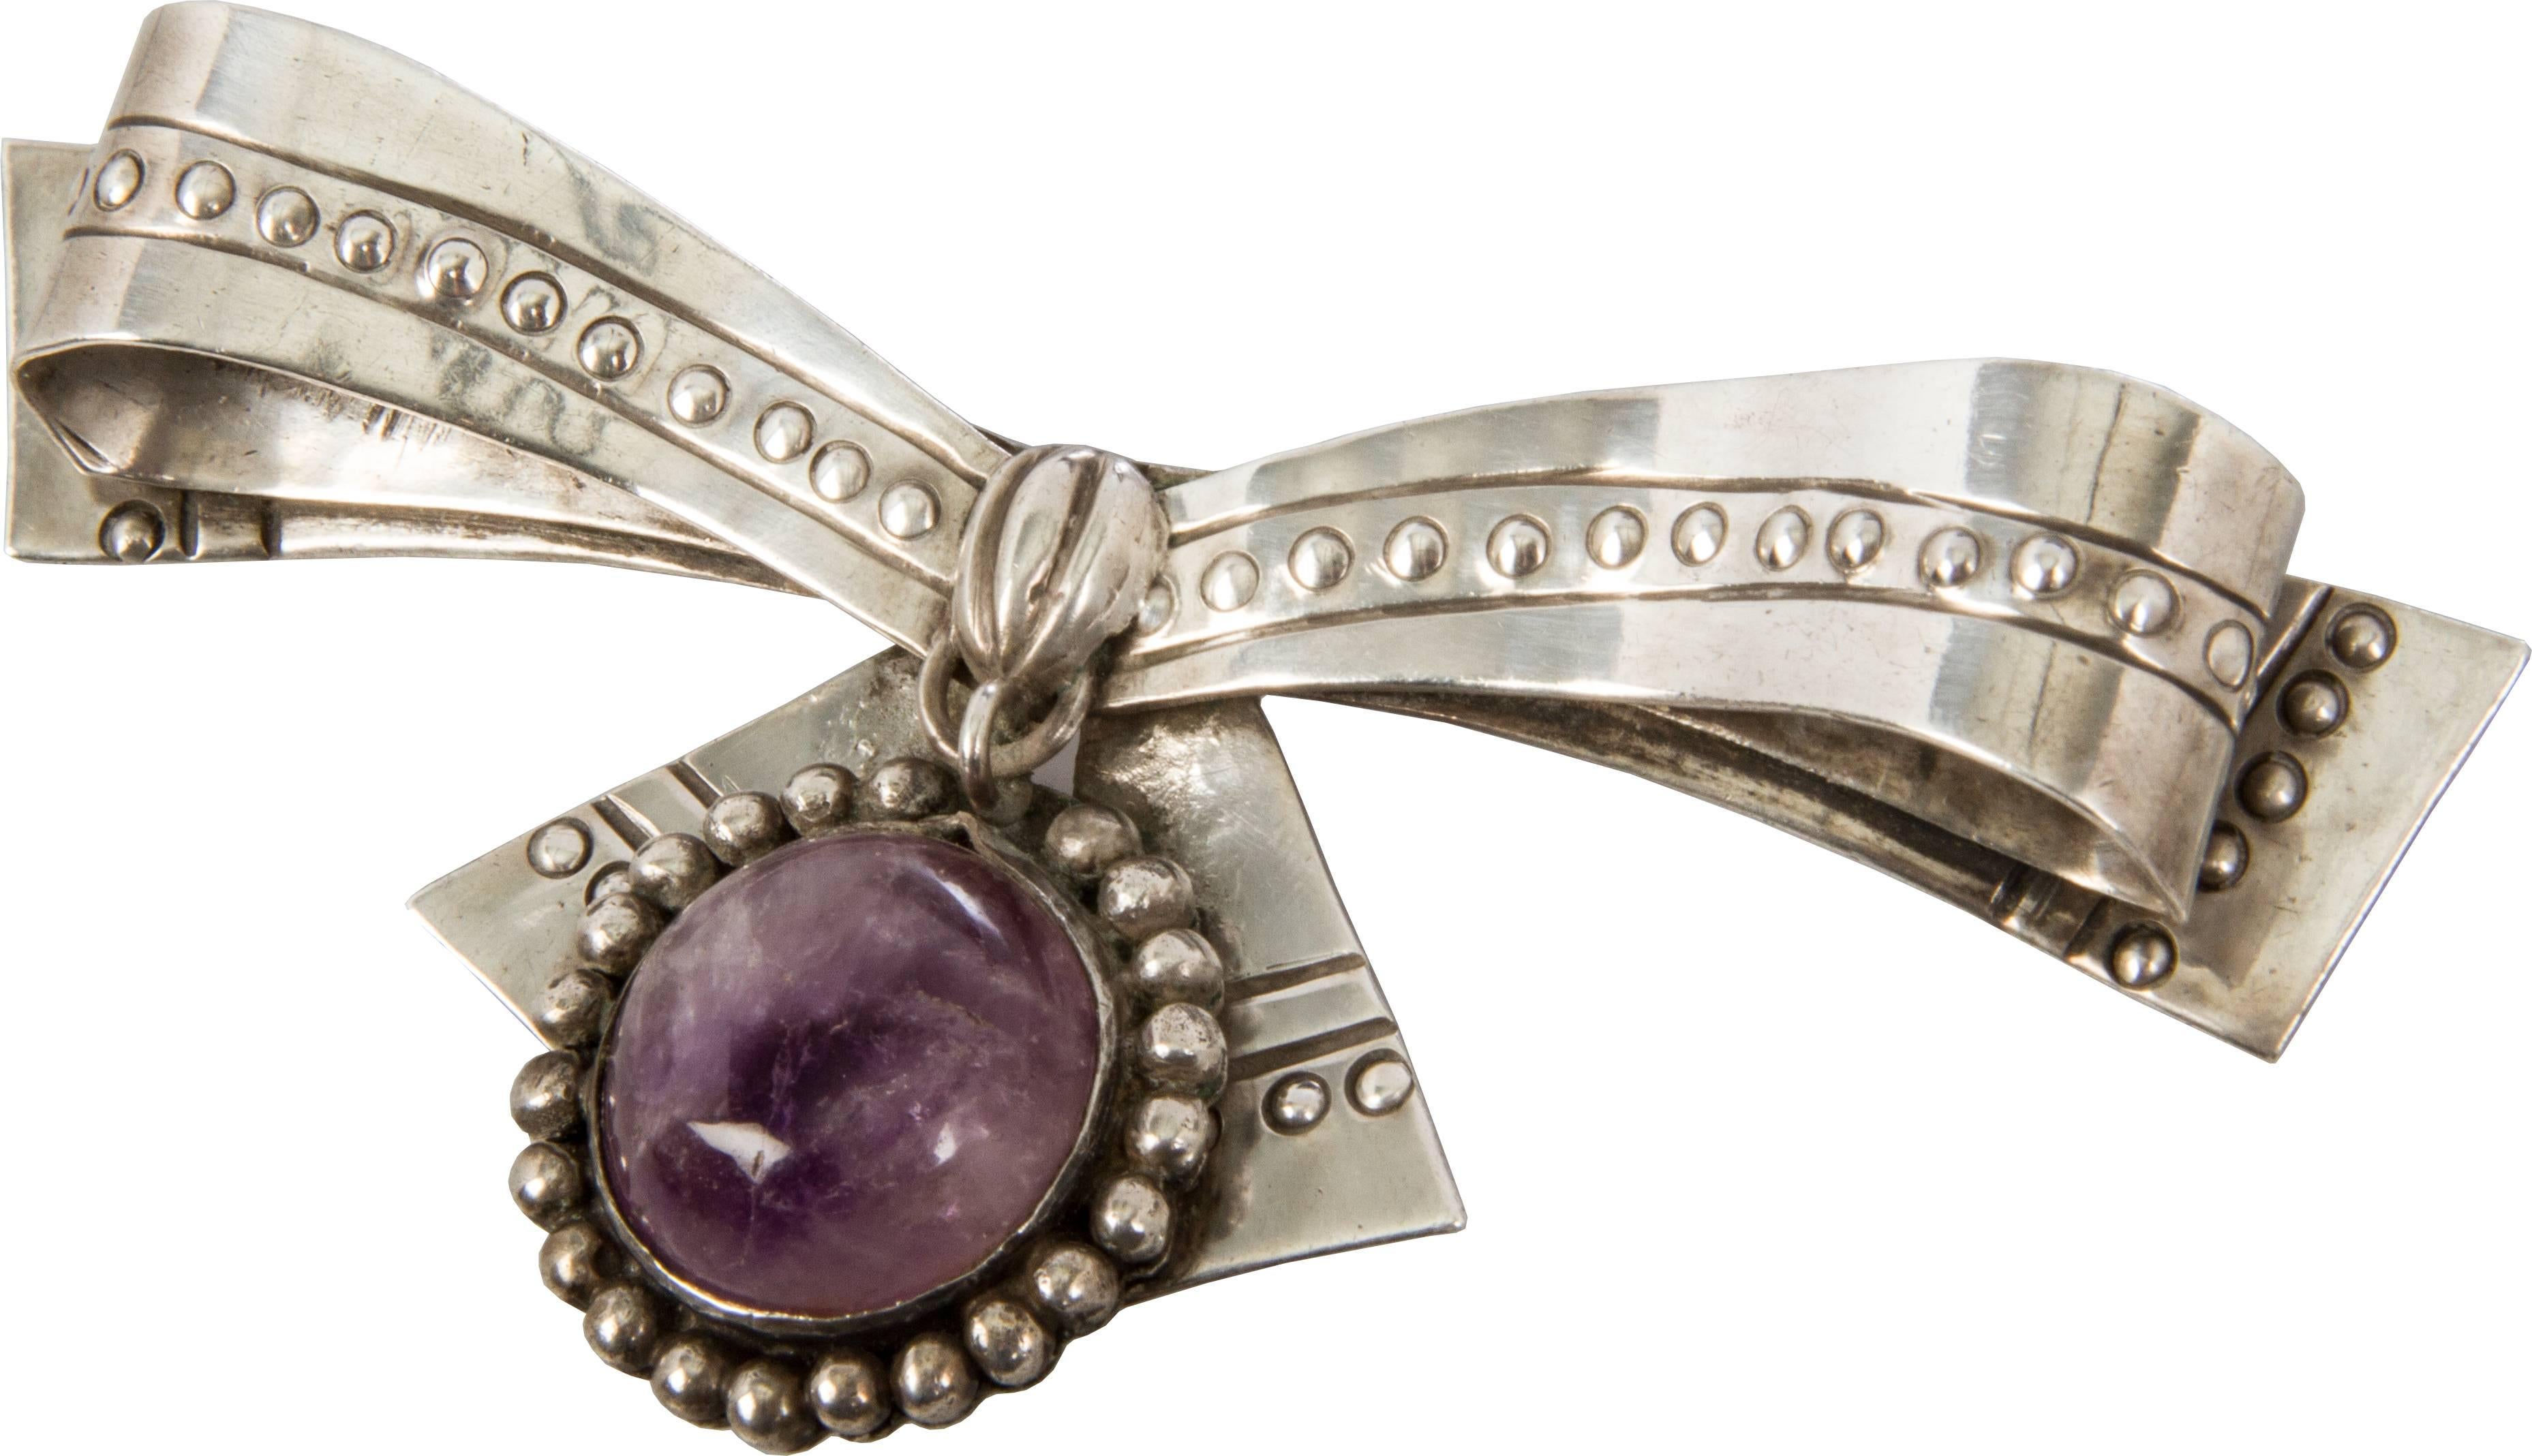 This is a nice example of Spratling's early work featuring raised beading and an amethyst cabochon.